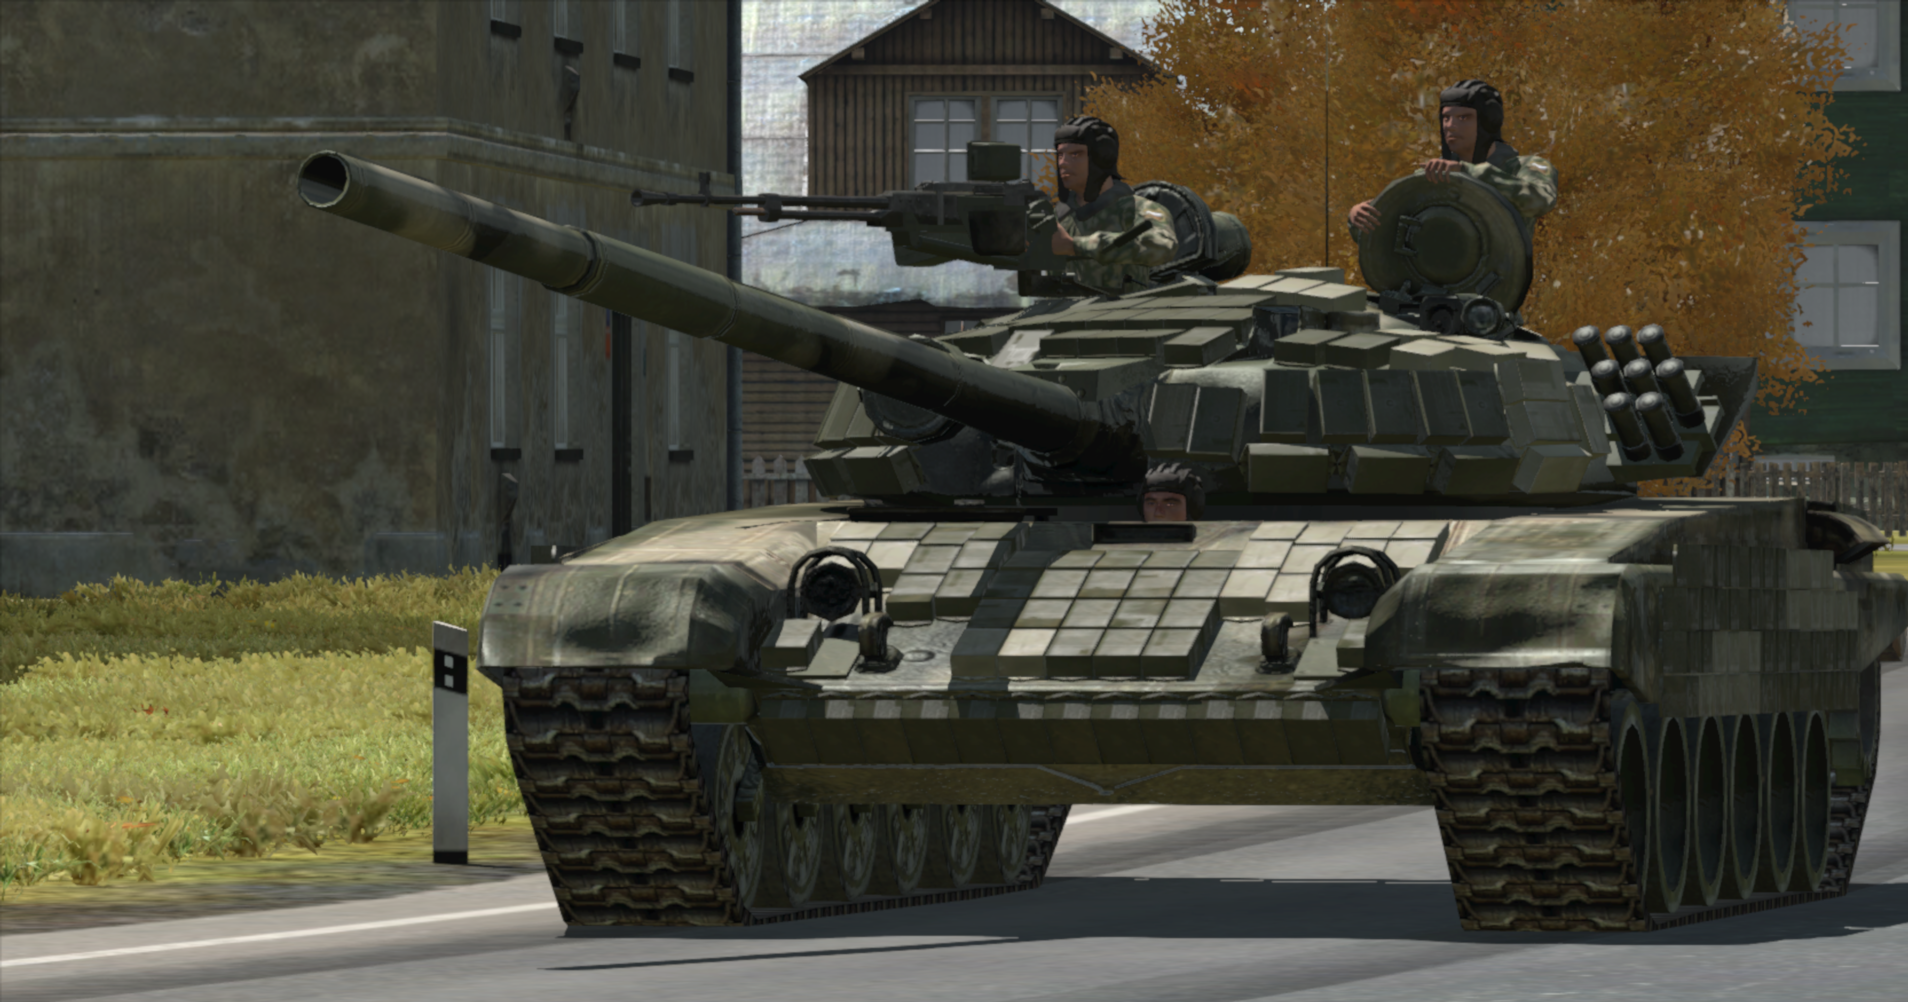 The T-72B is Back in Action